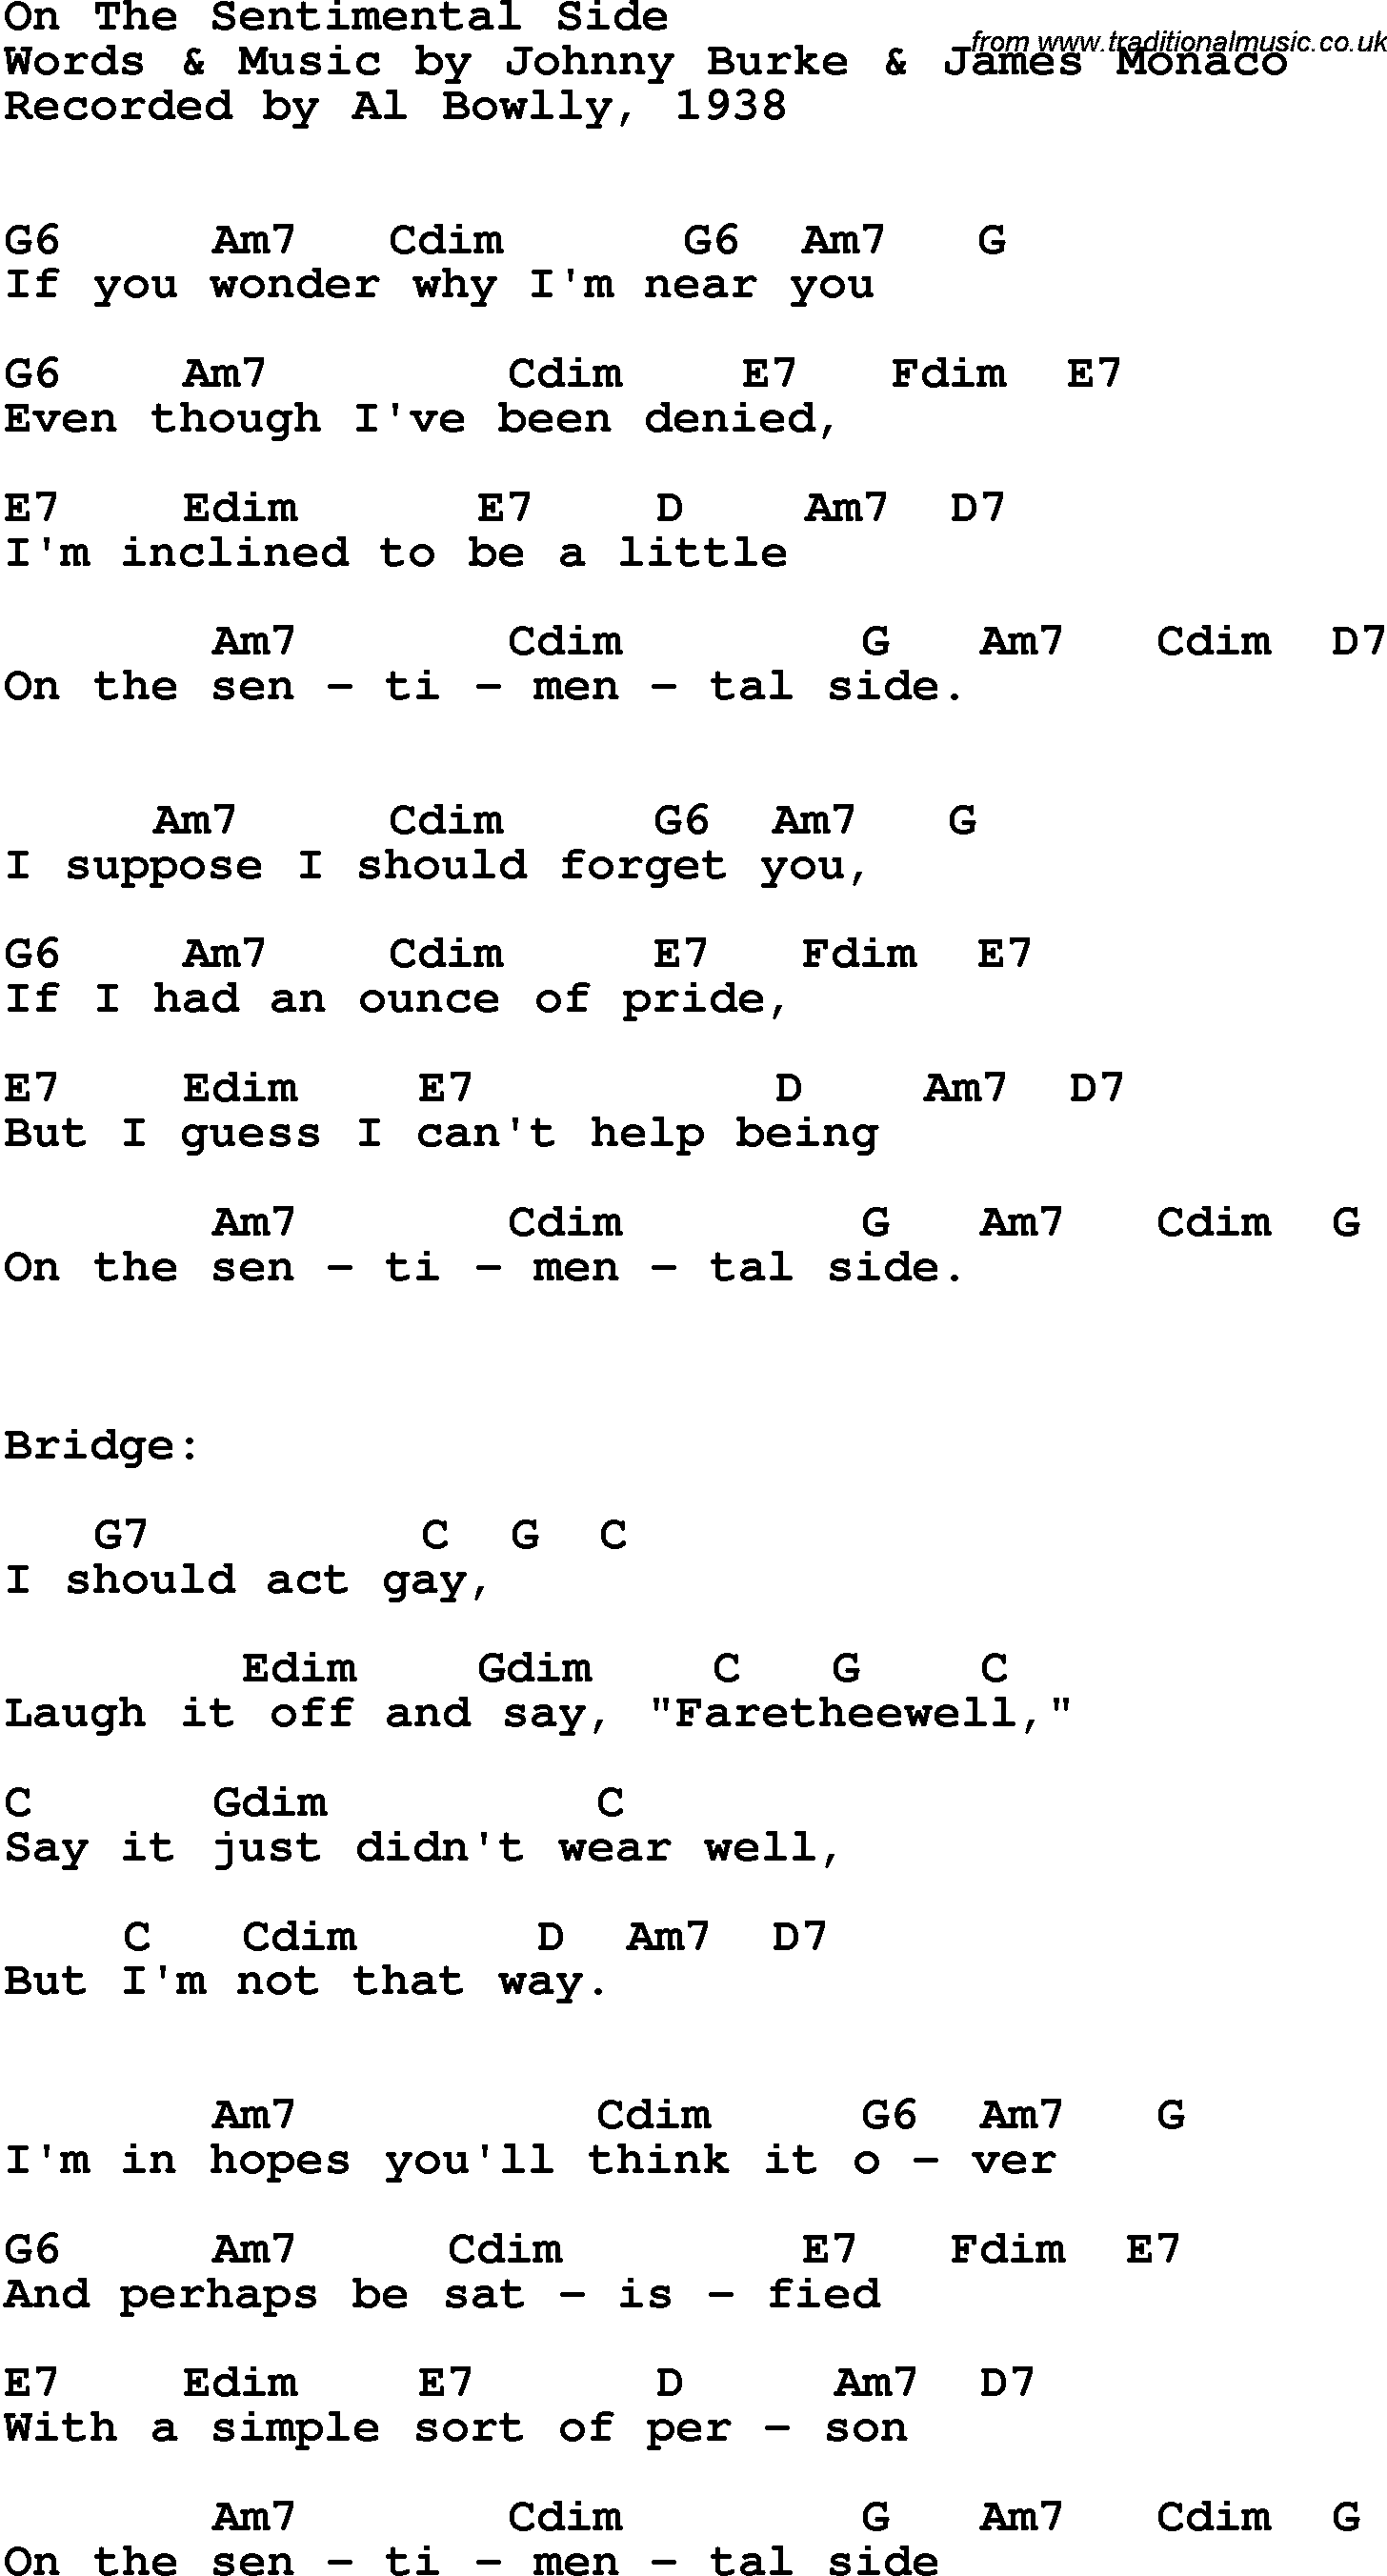 Song Lyrics with guitar chords for On The Sentimental Side - Al Bowlly 1938